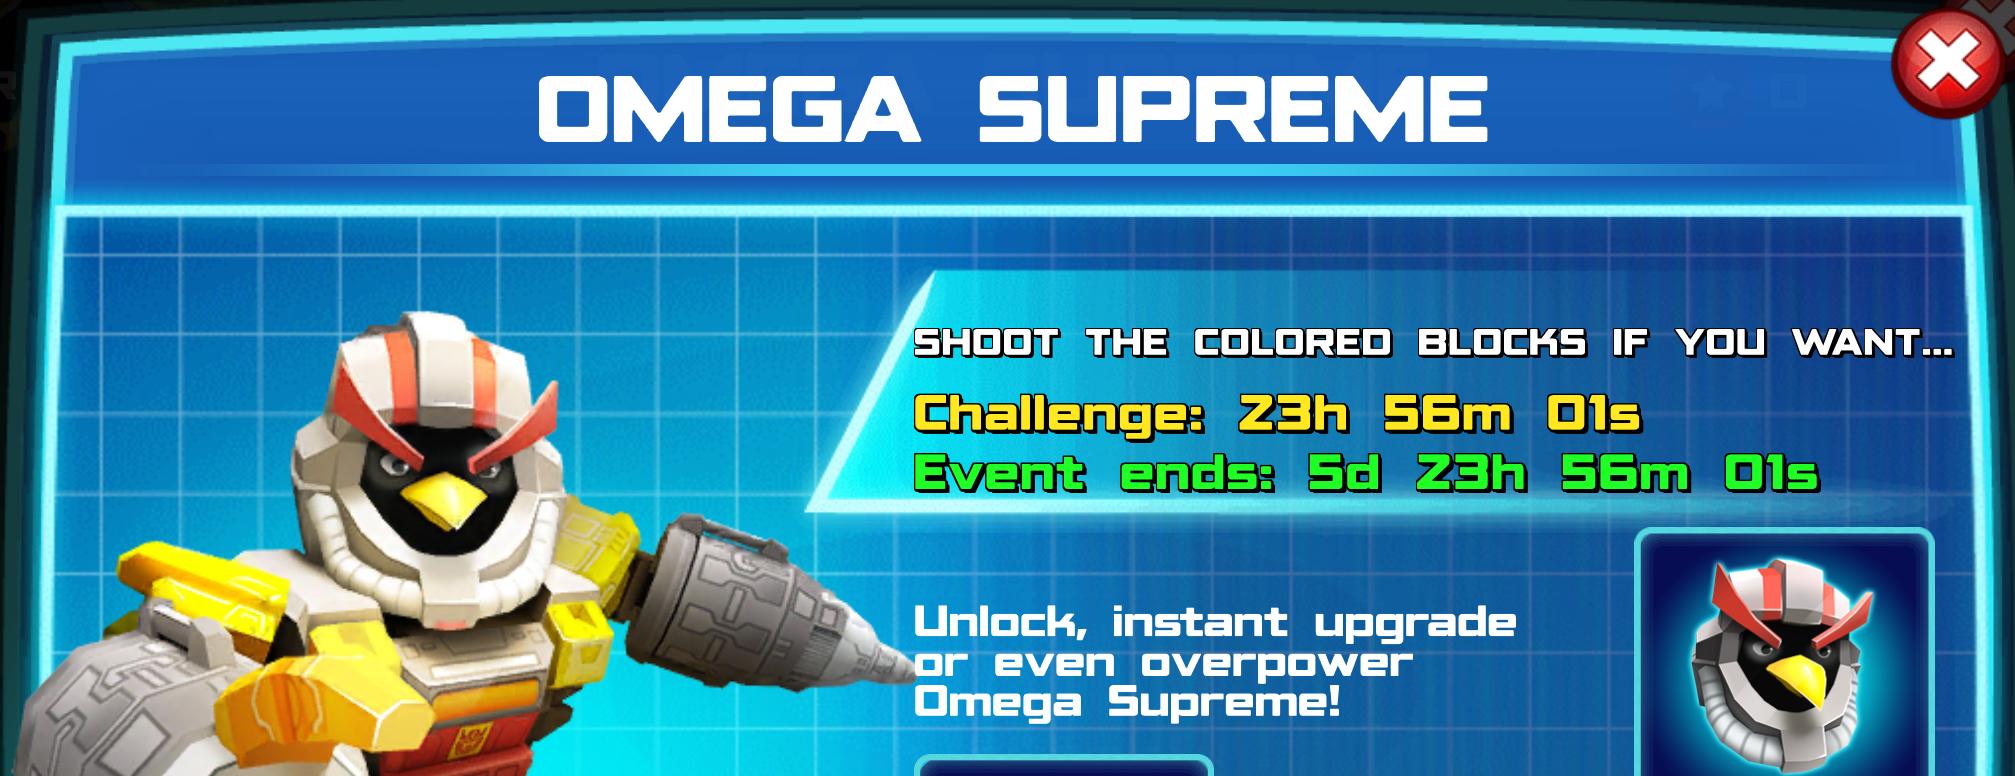 (Part of) The event banner for Omega Supreme